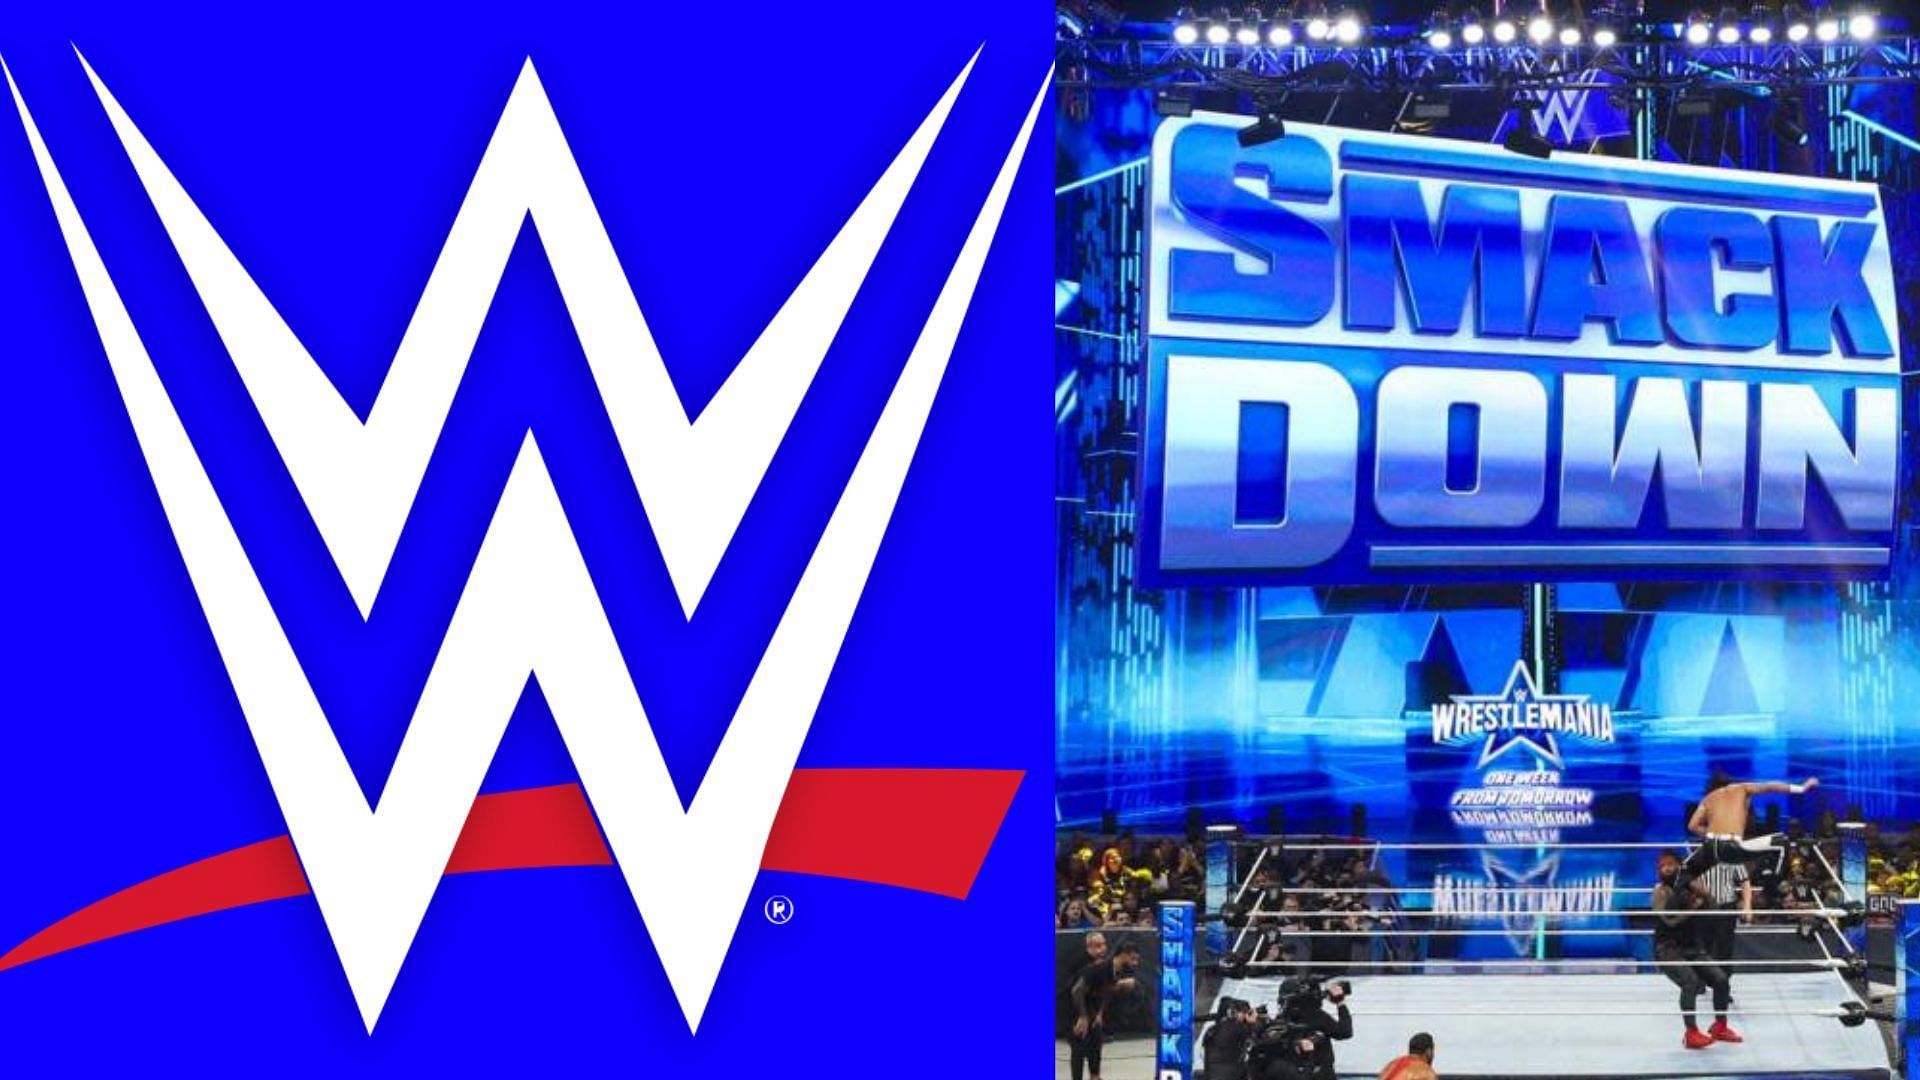 A popular tag team will be competing tonight on SmackDown.